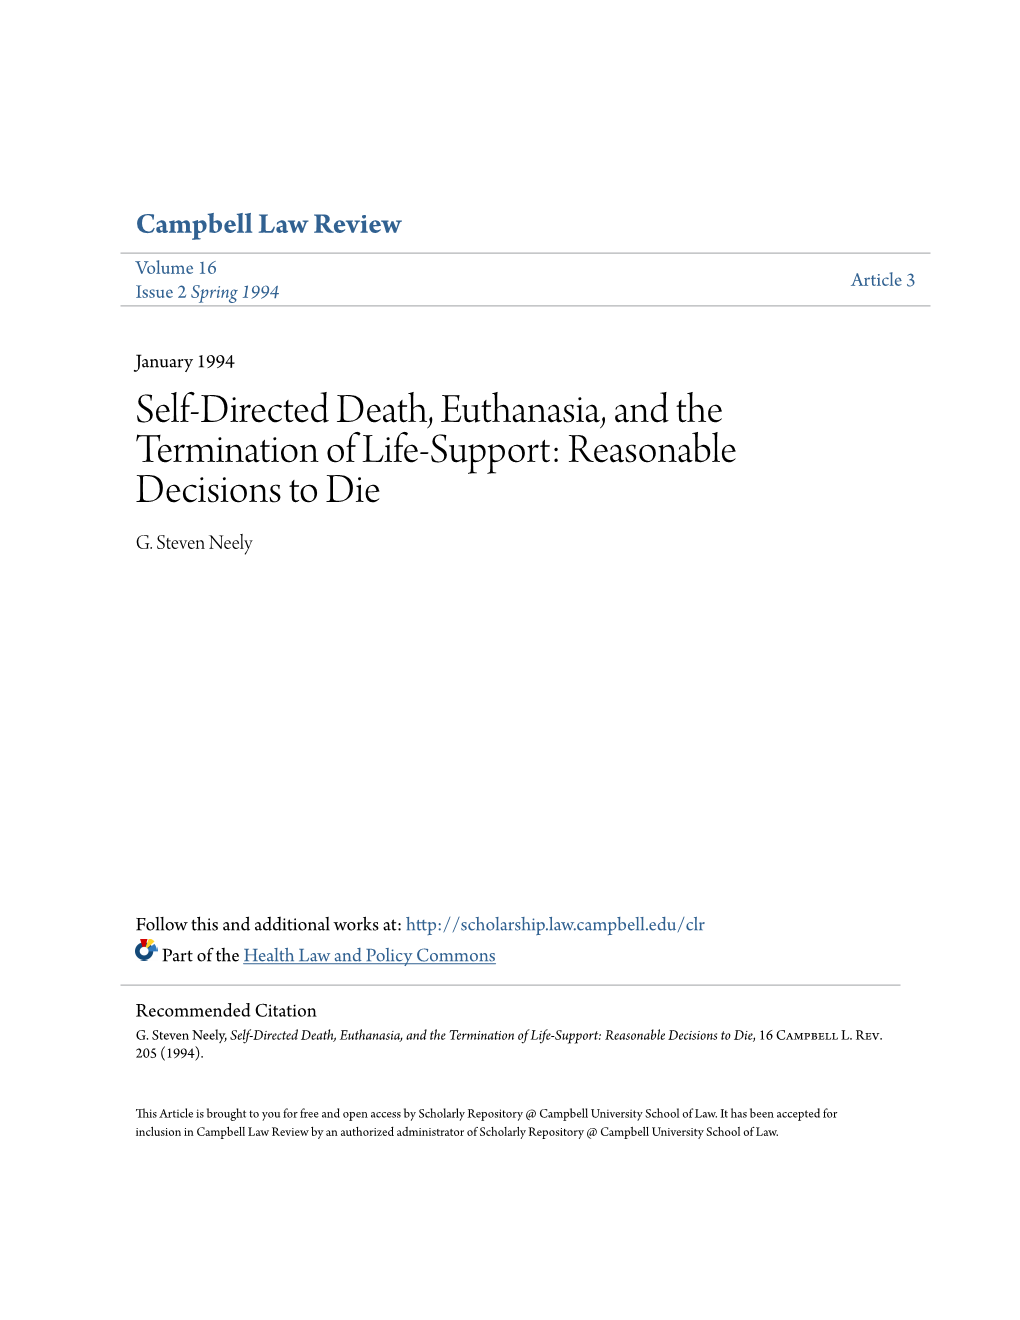 Self-Directed Death, Euthanasia, and the Termination of Life-Support: Reasonable Decisions to Die G